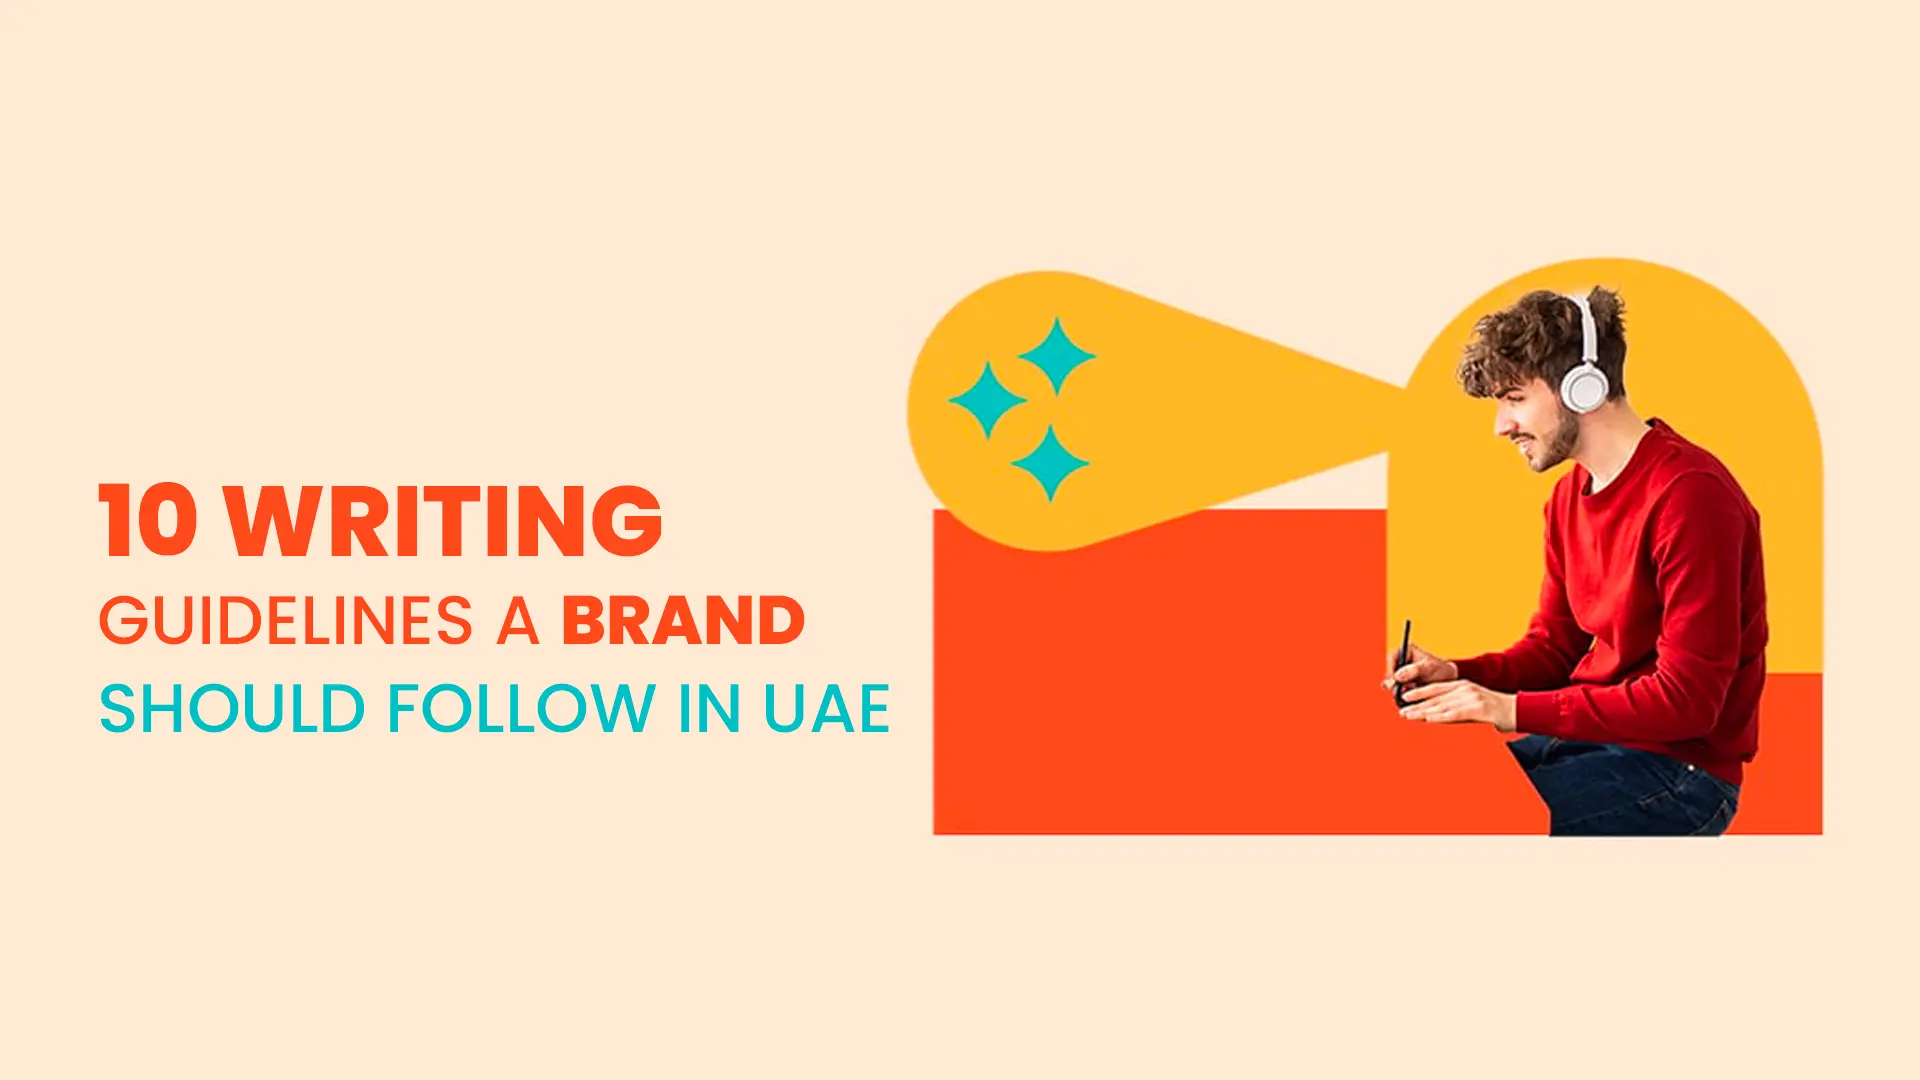 10 Writing Guidelines a Brand Should Follow in UAE